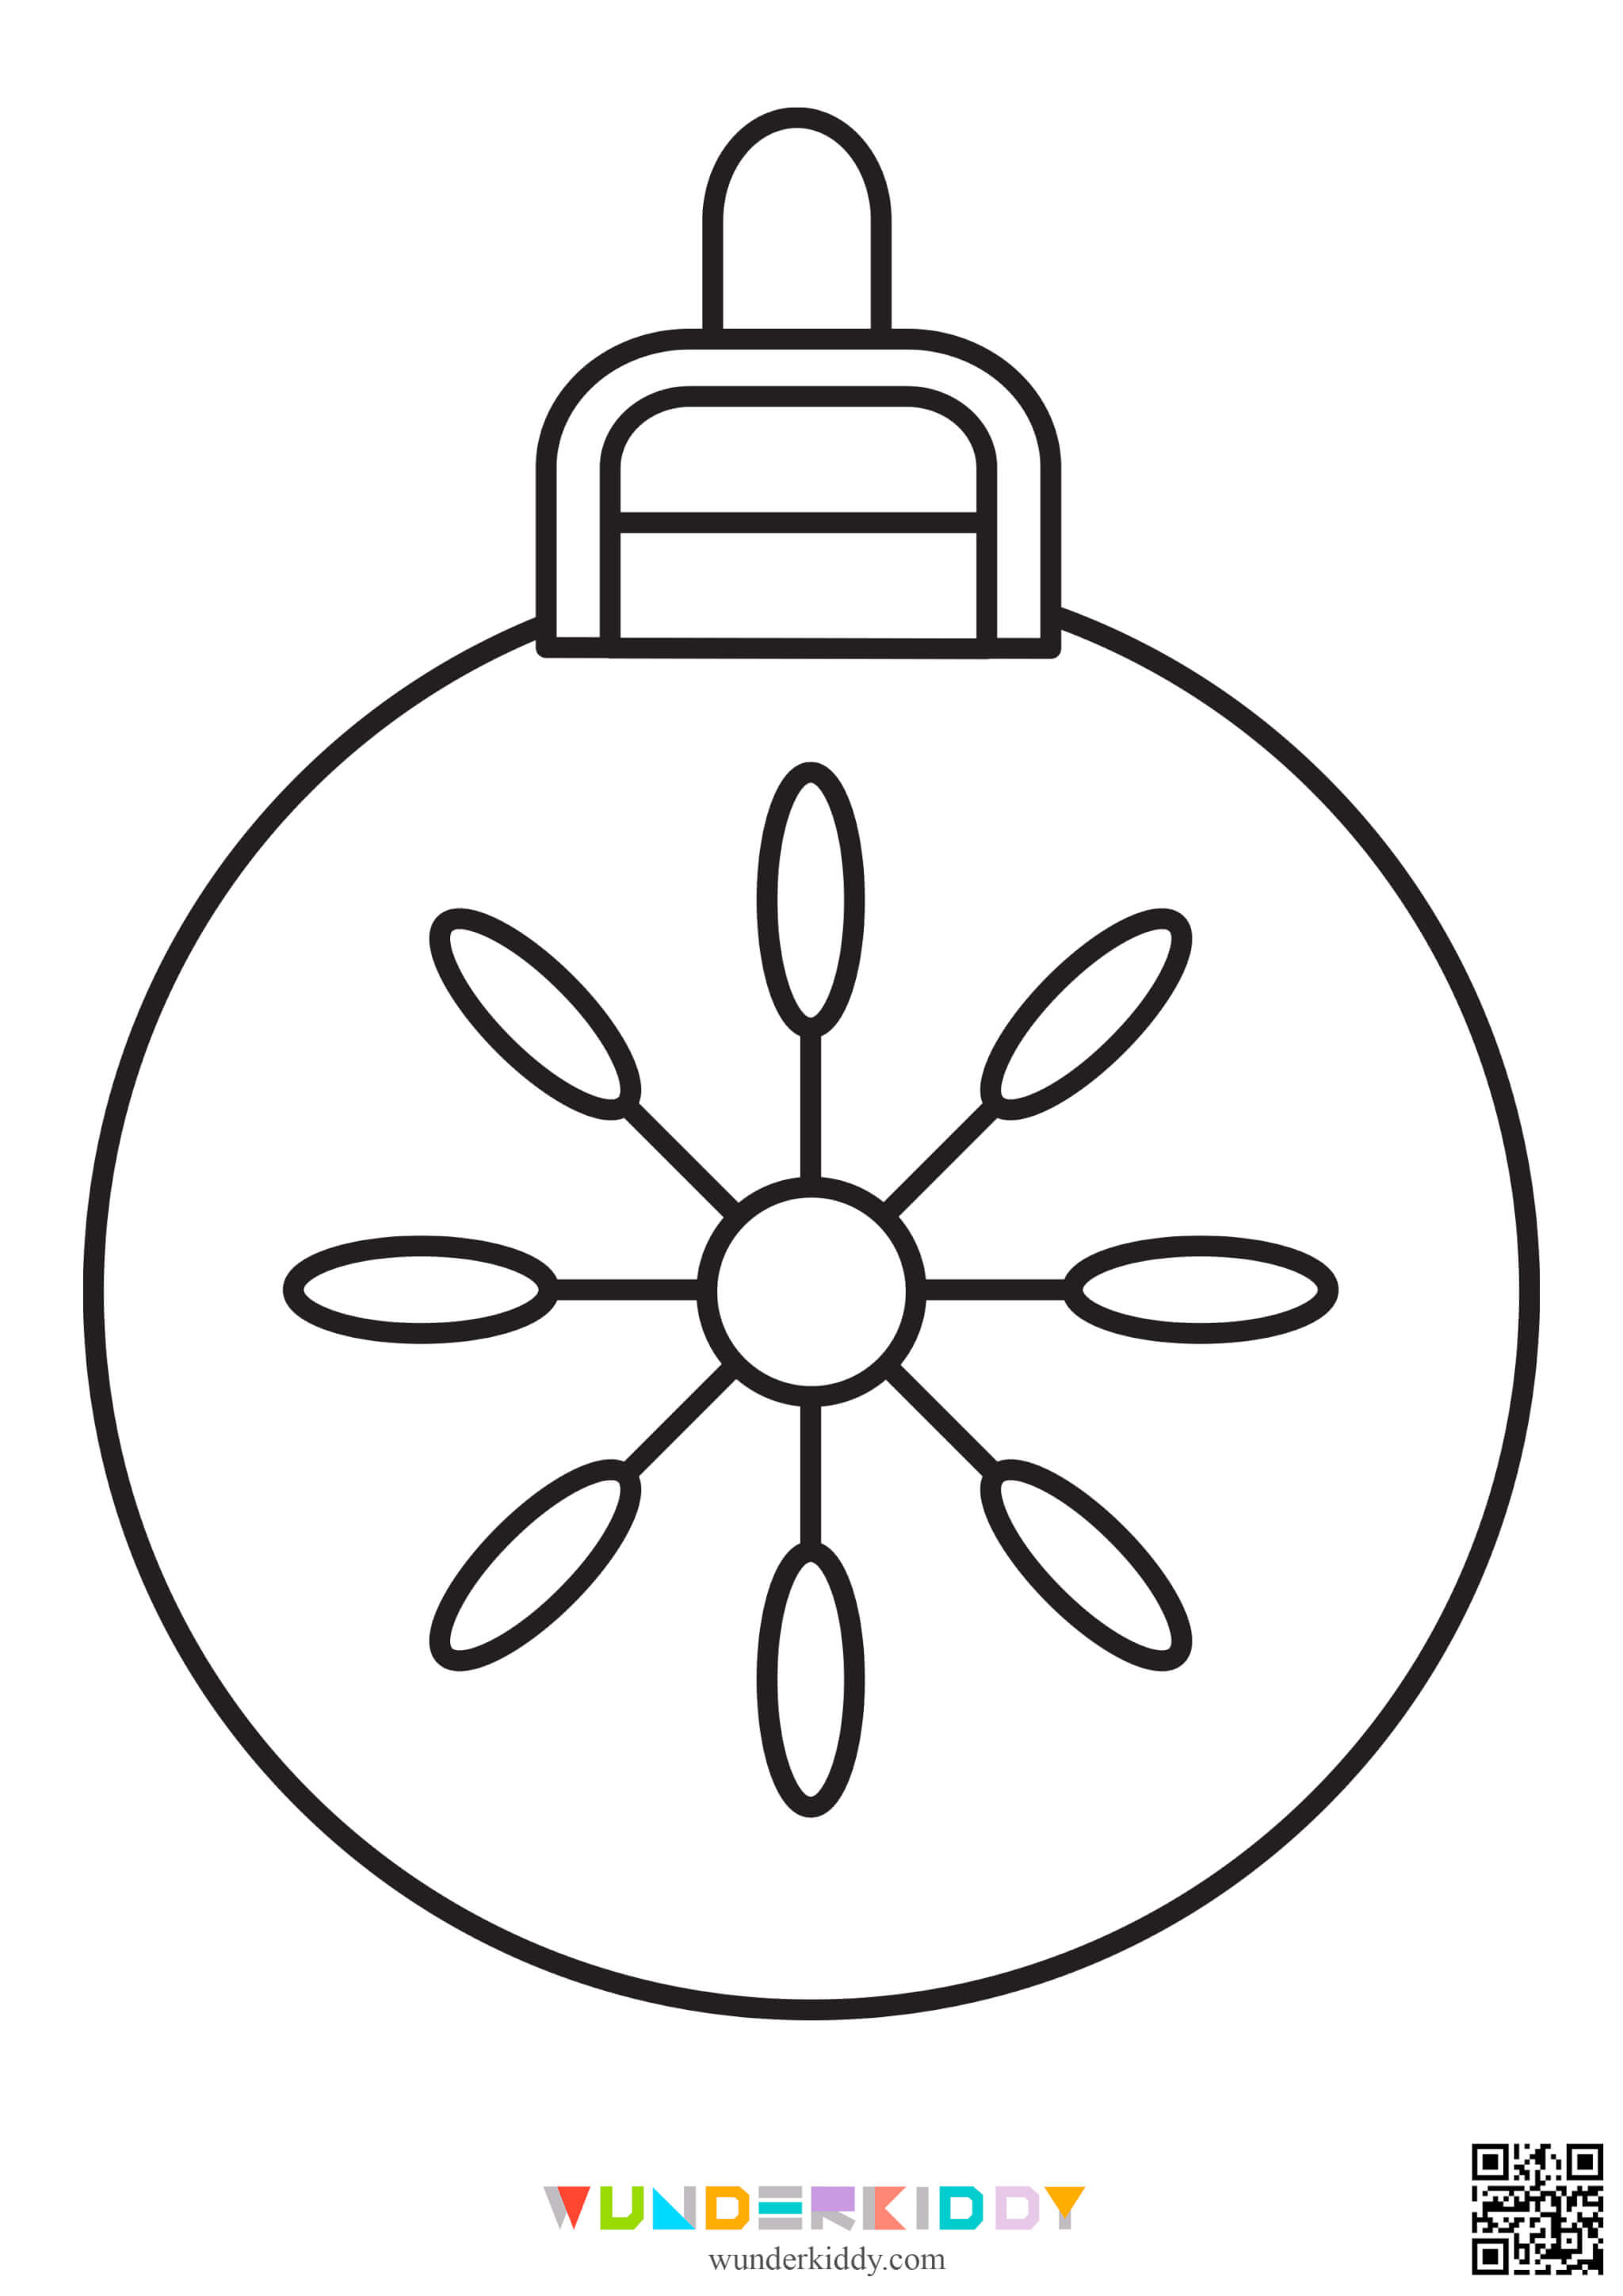 Christmas Ornament Coloring Pages - Image 10